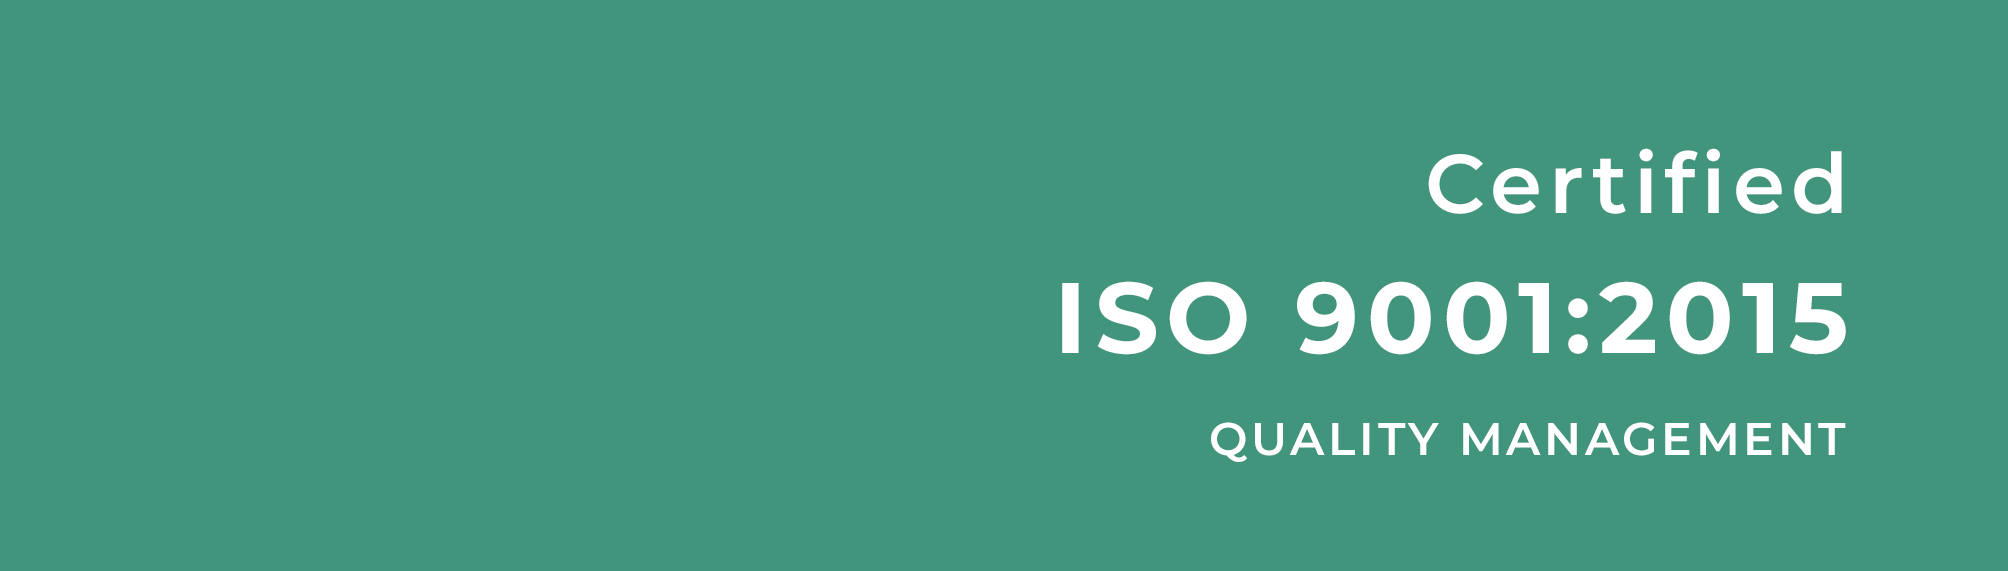 Certified ISO 9001:2015 Quality Management